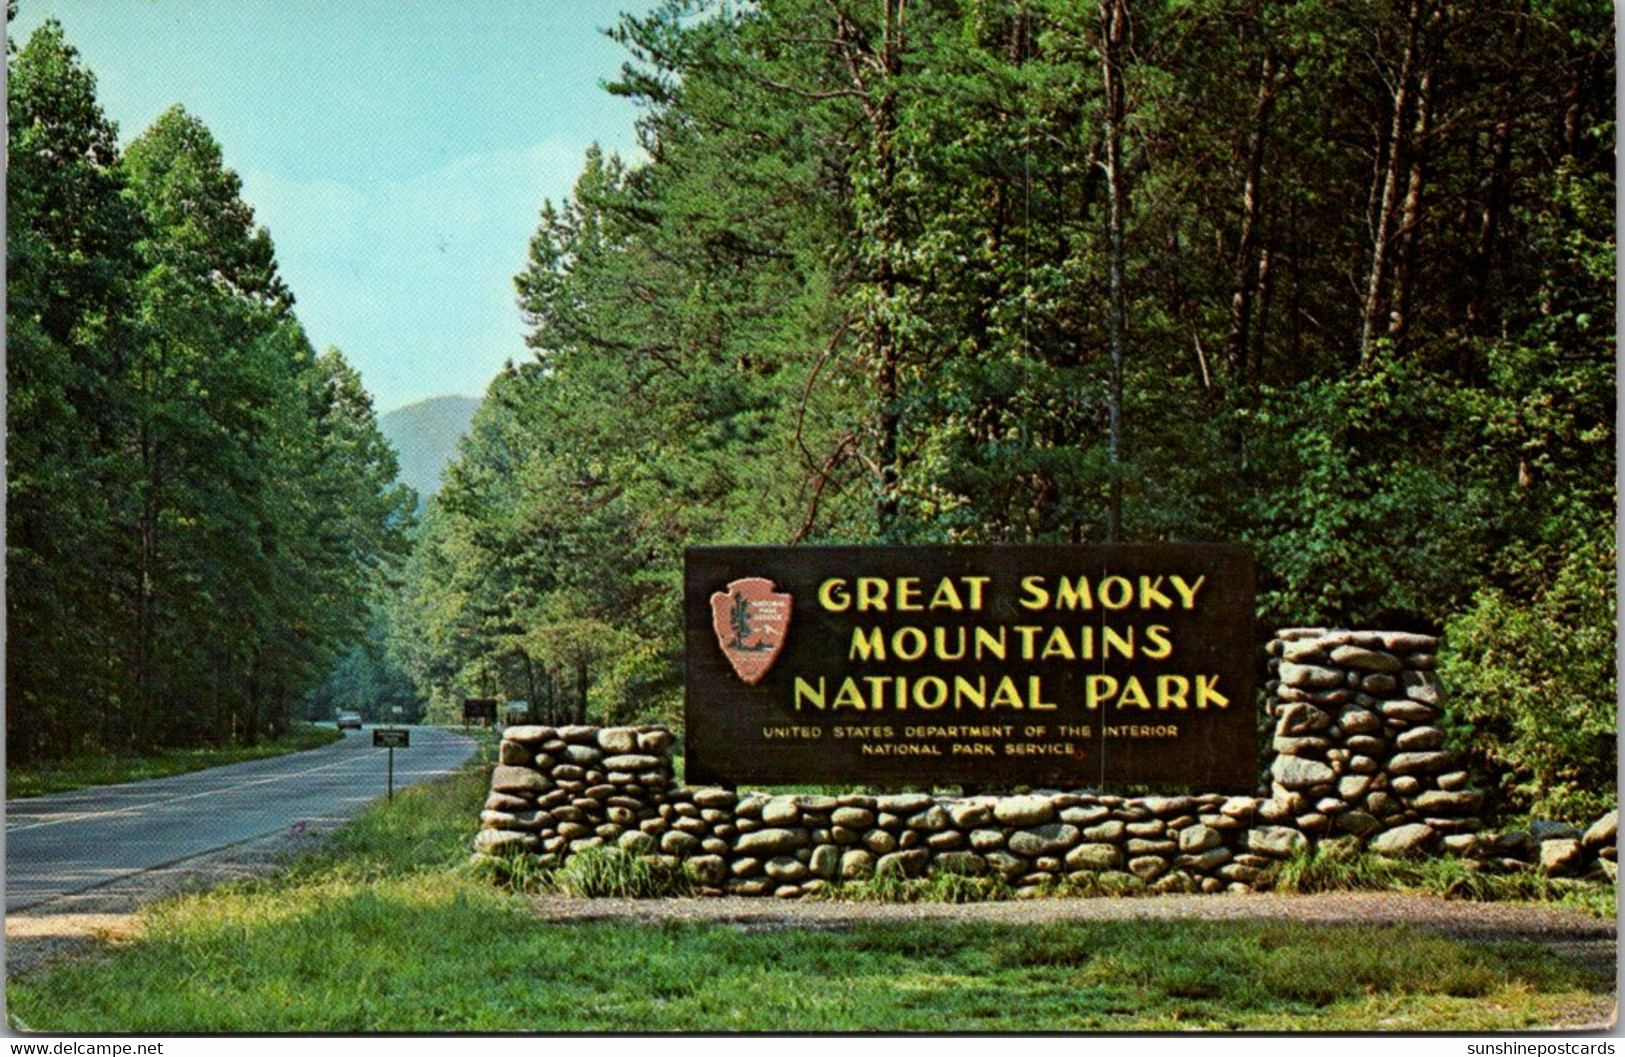 Great Smoky Mountains National Park Welcome Marker - USA National Parks